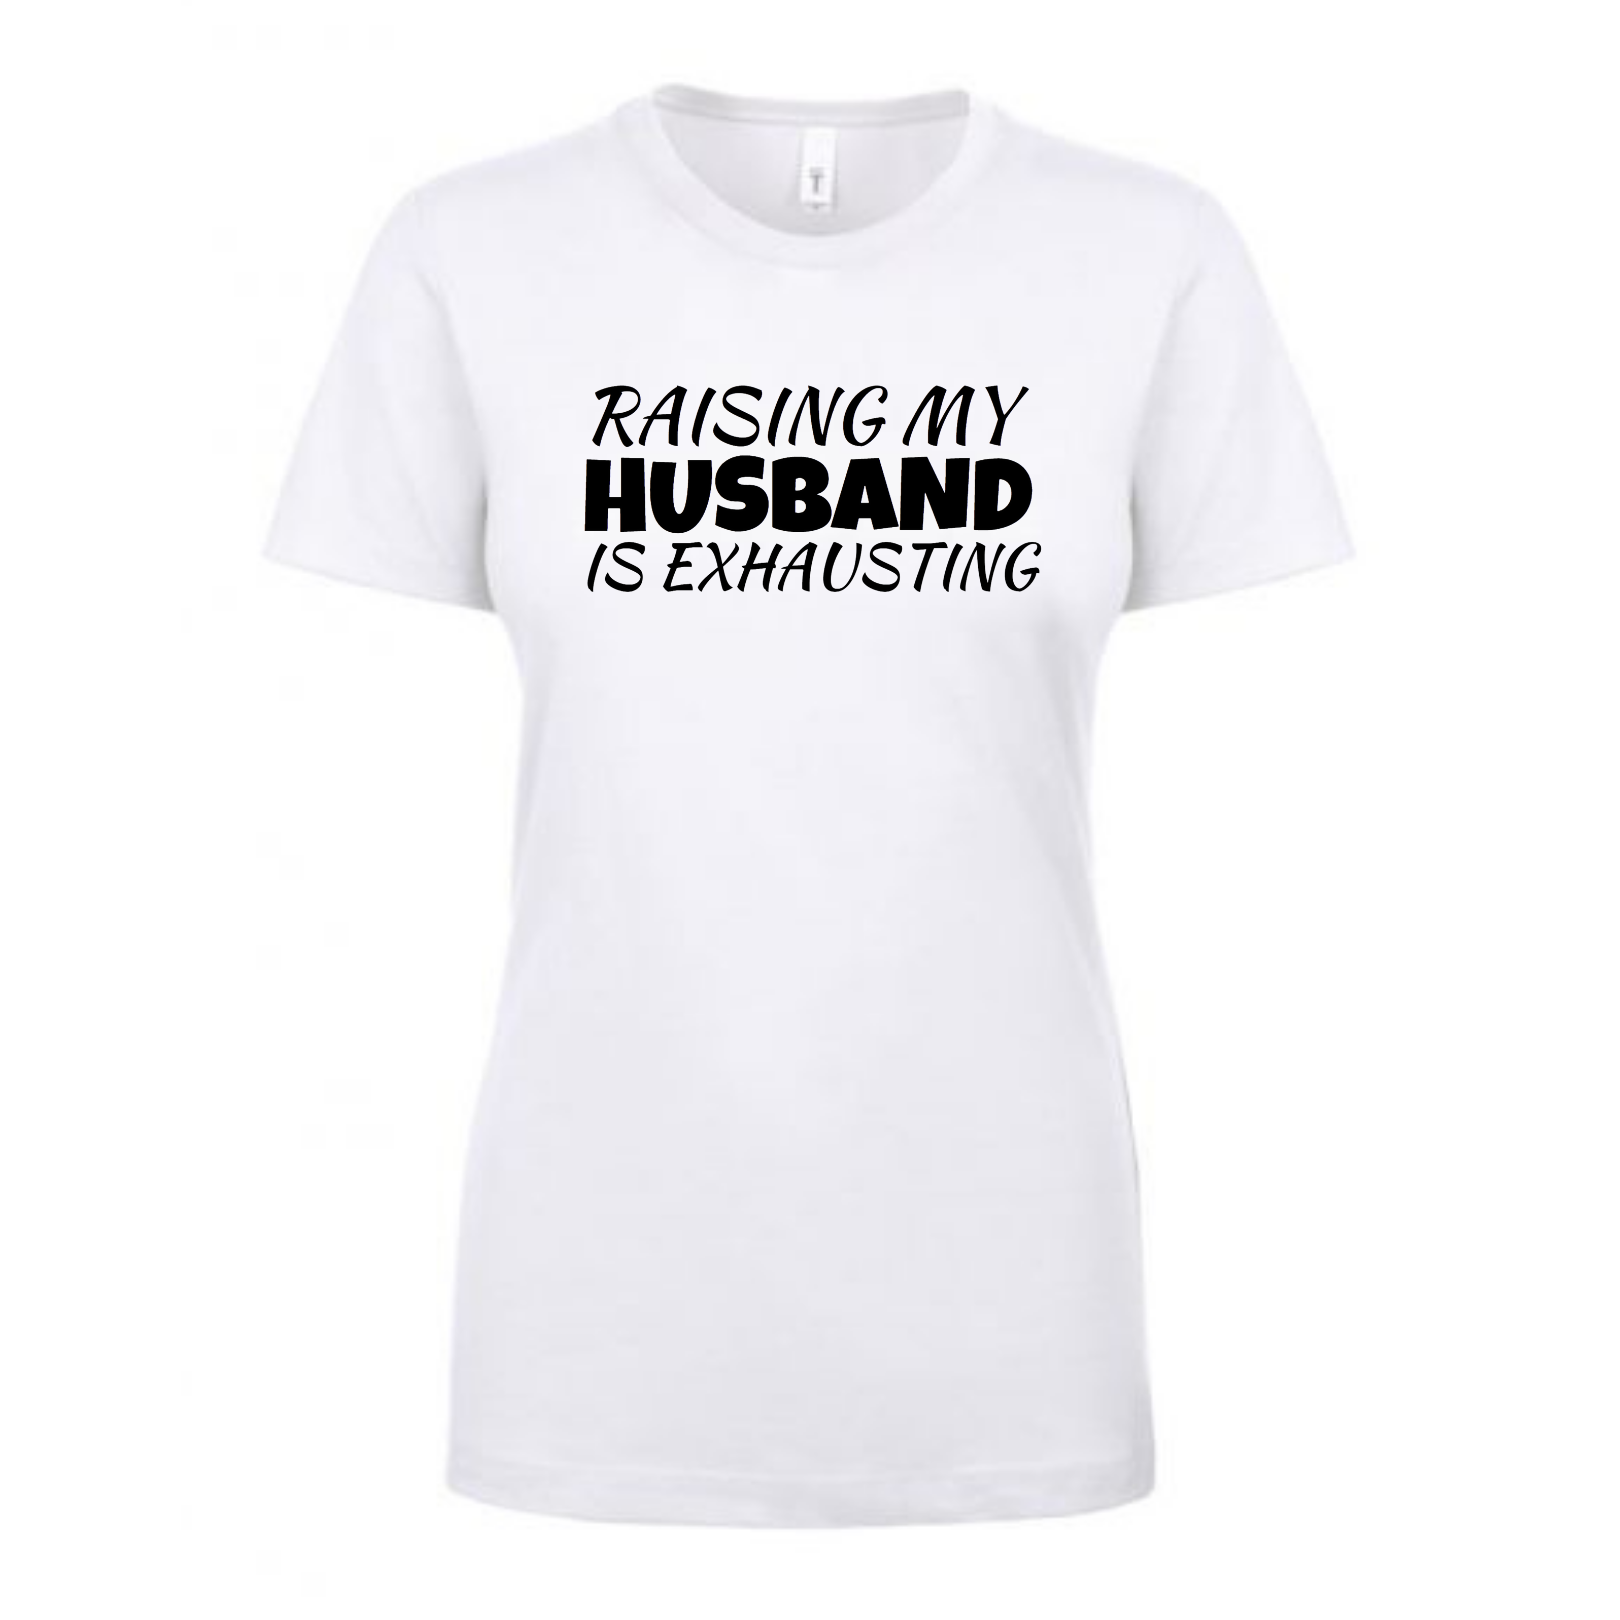 Raising My Husband is Exhausting - Ladies T-Shirt - Next Level - Mister Snarky's